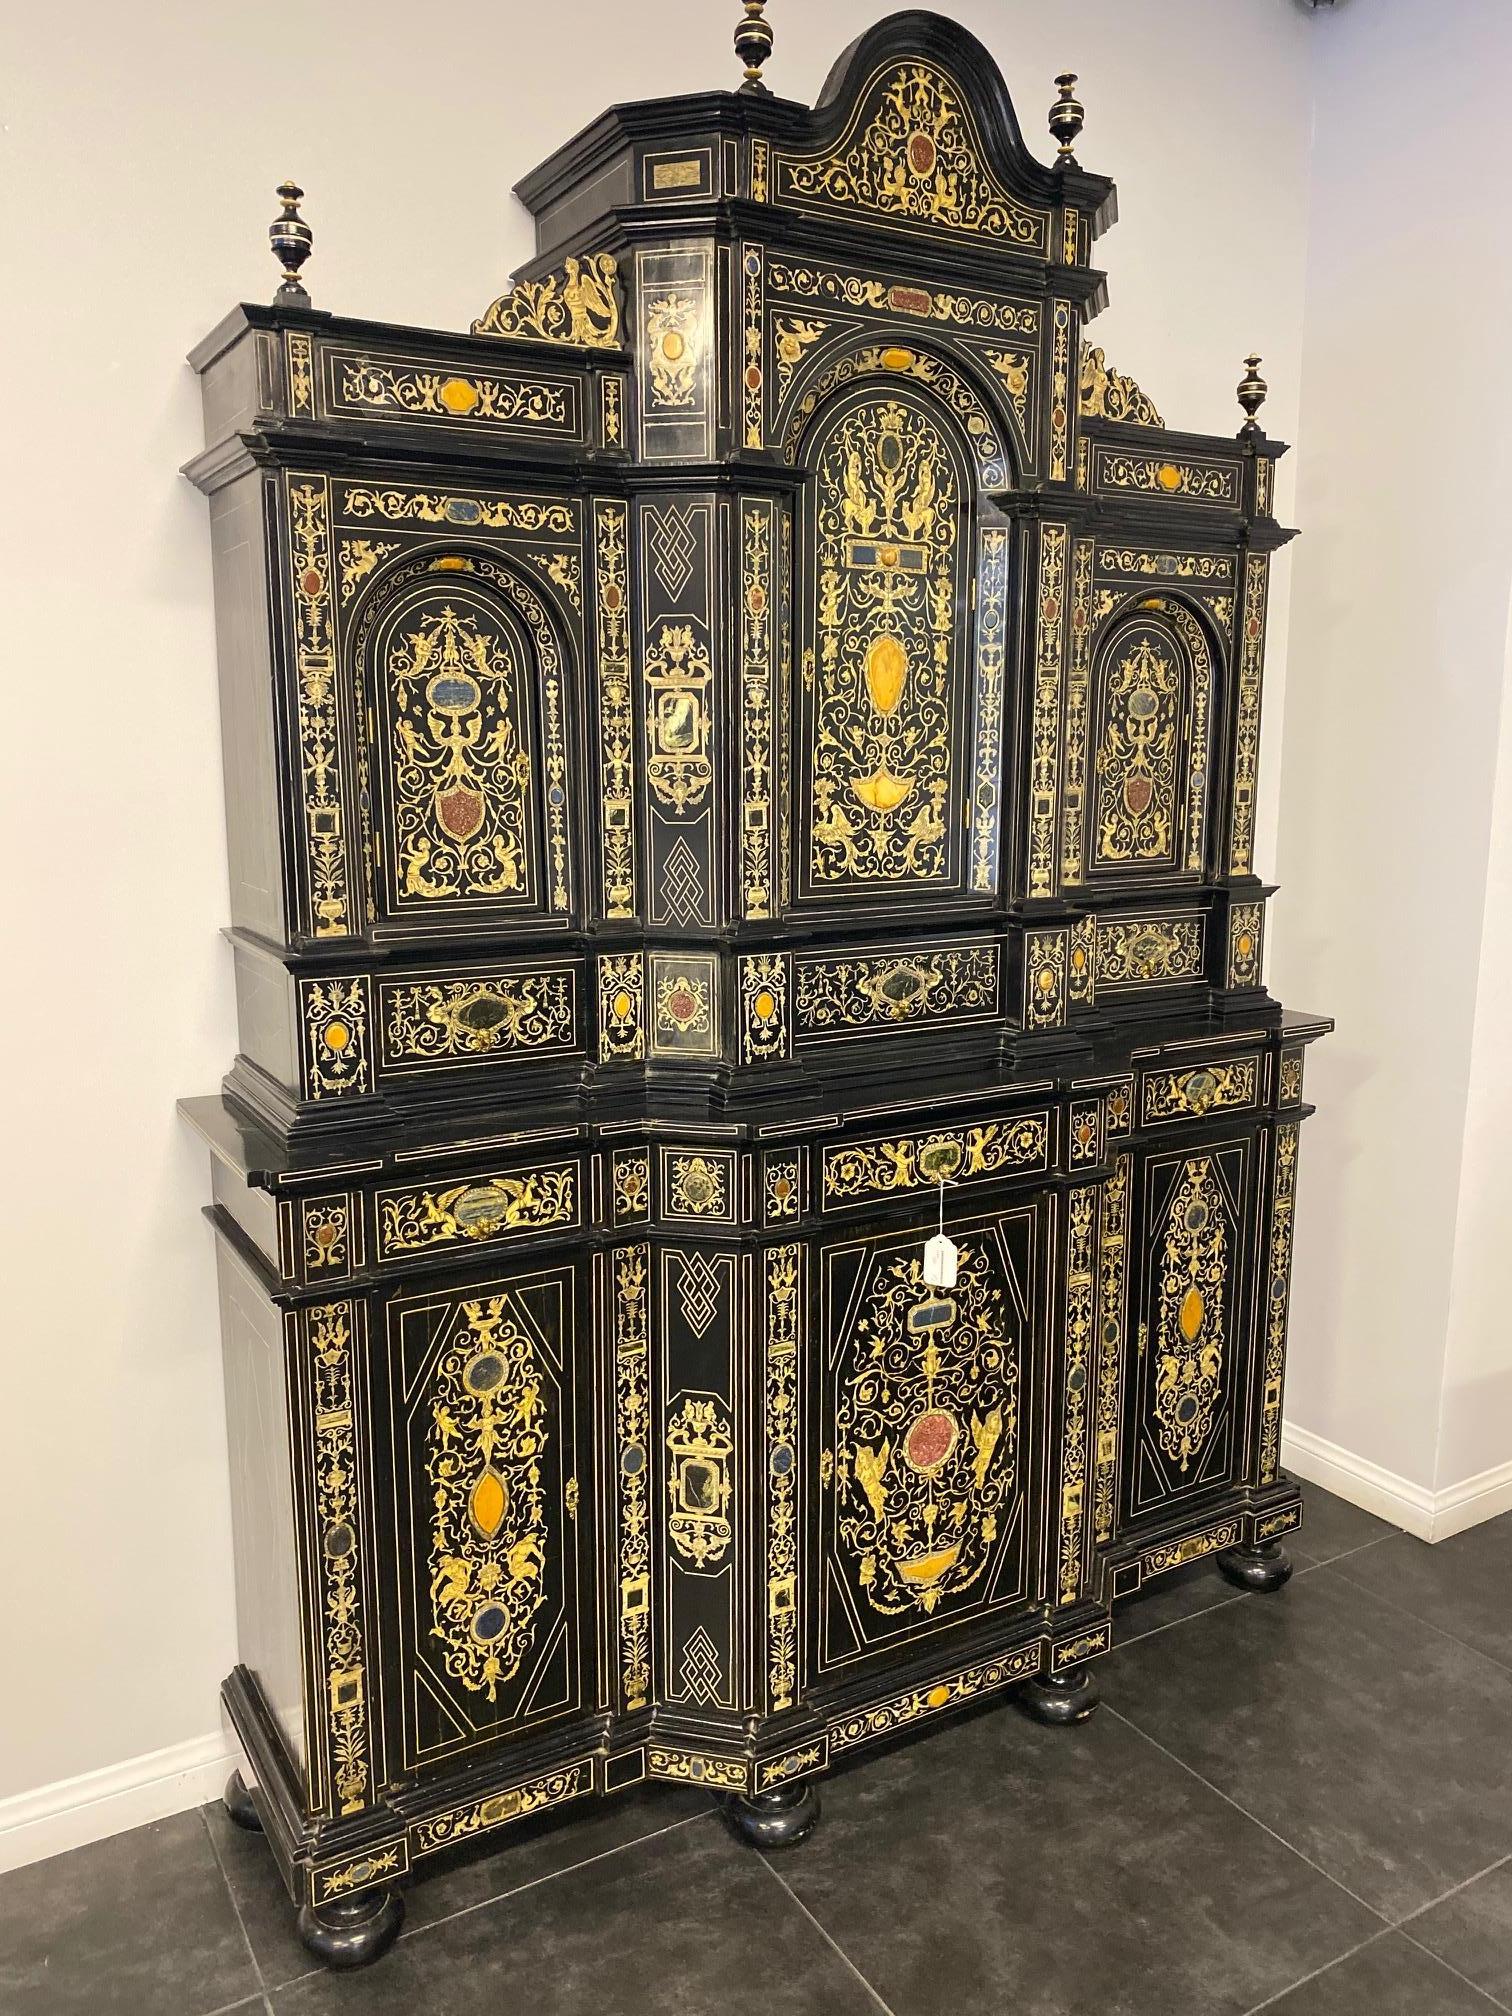 Extremely fine Italian baroque ebonized wood, faux ivory, and hardstone cabinet, Florence, 20th century.

Decorated overall with Berainesque (light arabesques and playful grotesques) motifs including rinceaux, putti and mythical birds, and inlaid